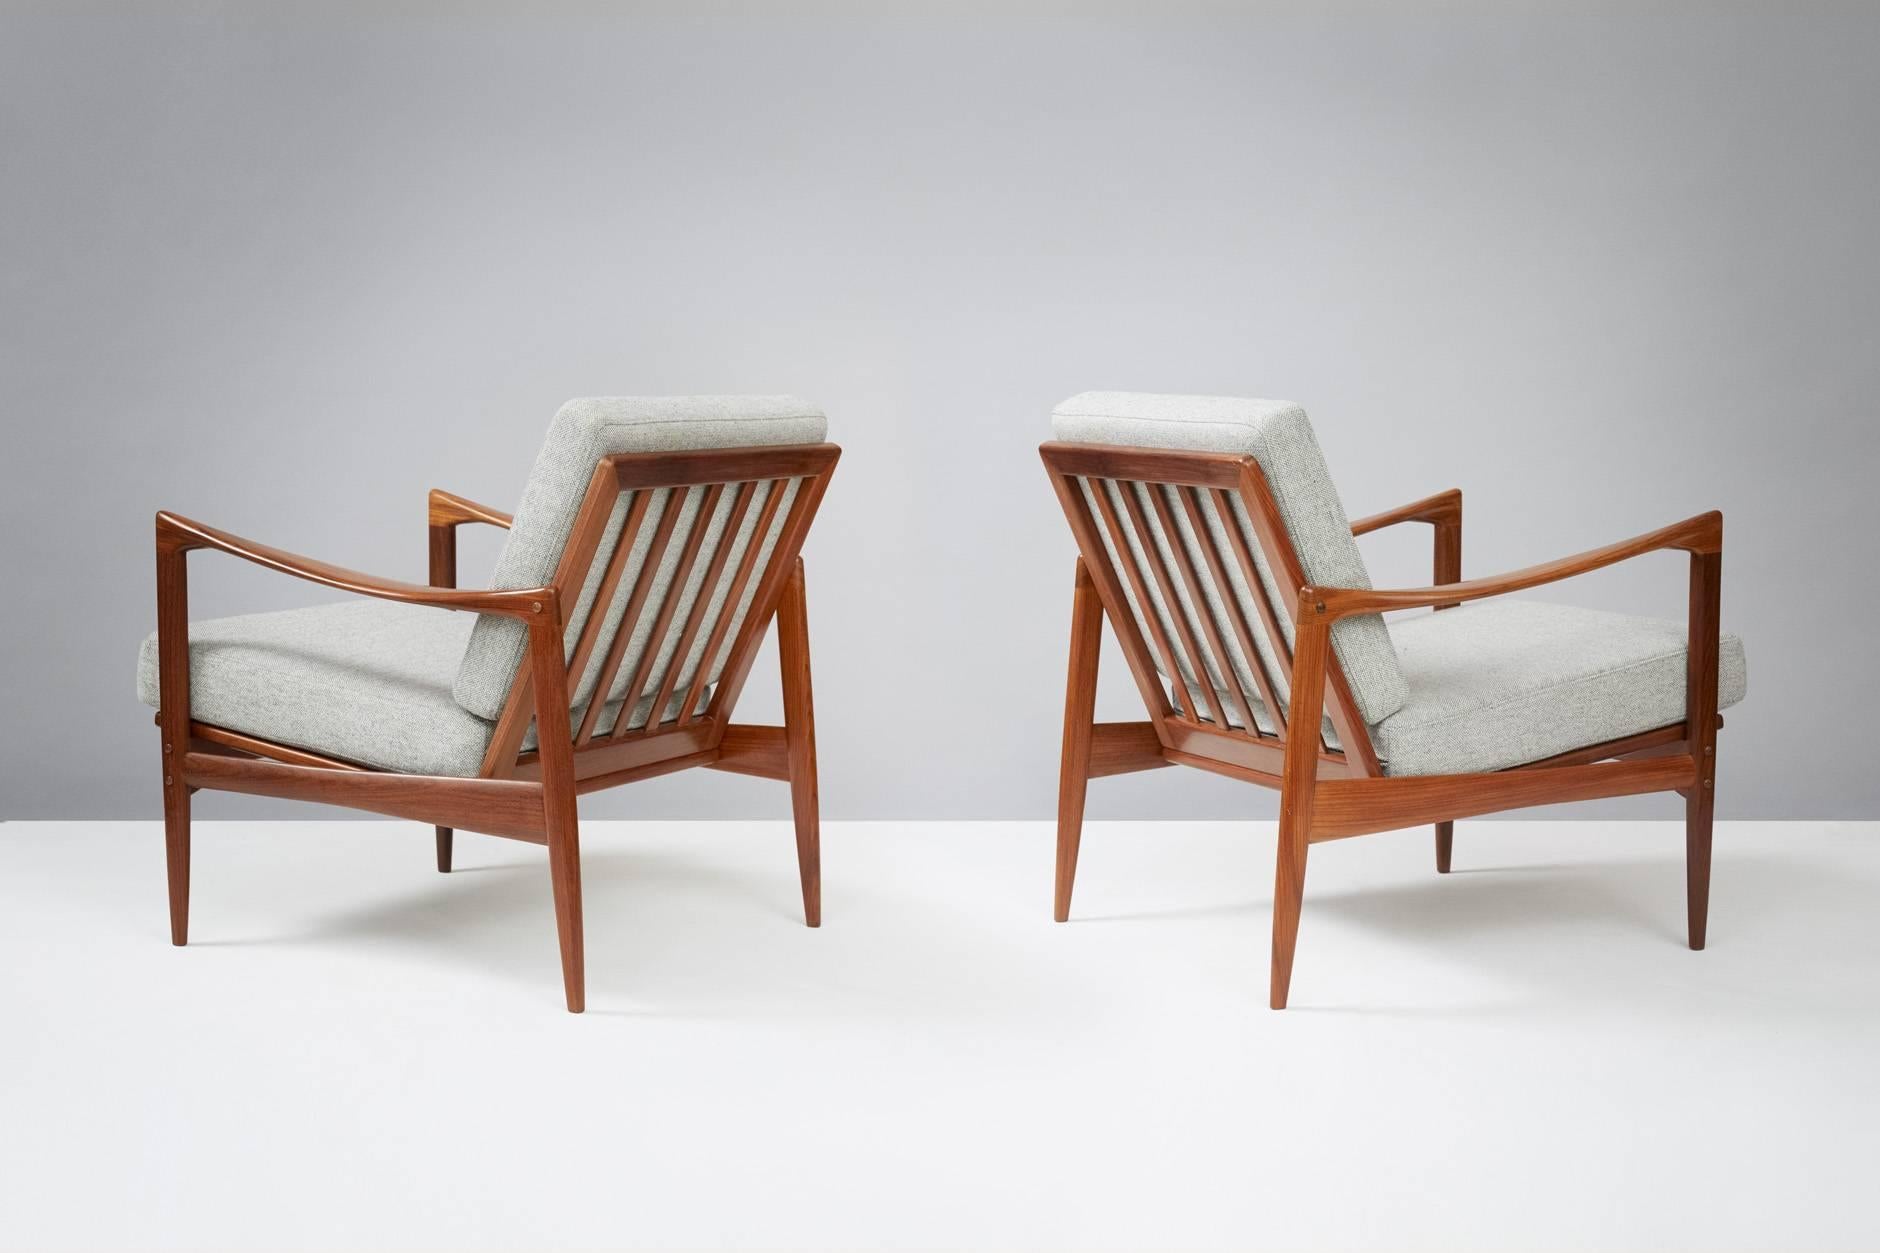 Ib Kofod-Larsen

Candidate chairs, circa 1960.

Pair of Afromosia teak lounge chairs produced by OPE, Sweden, circa 1960. New cushions covered in Kvadrat wool fabric.

Other upholstery options available by request.